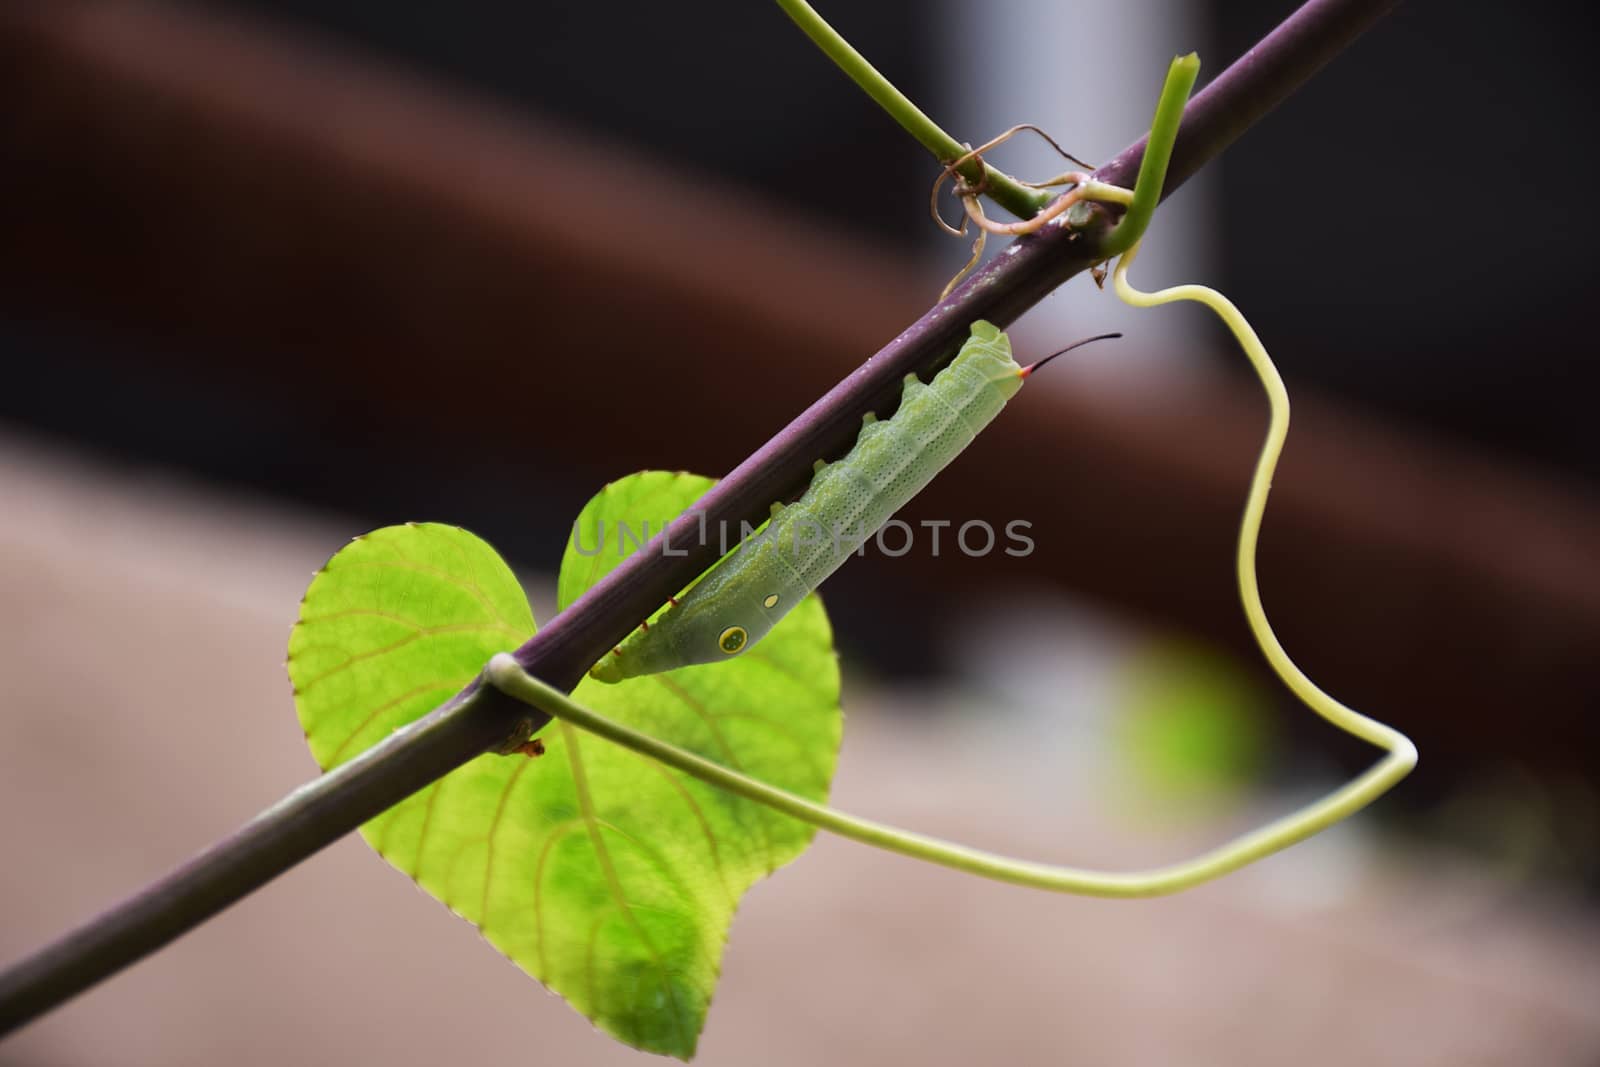 Worm or Caterpillars on branch.